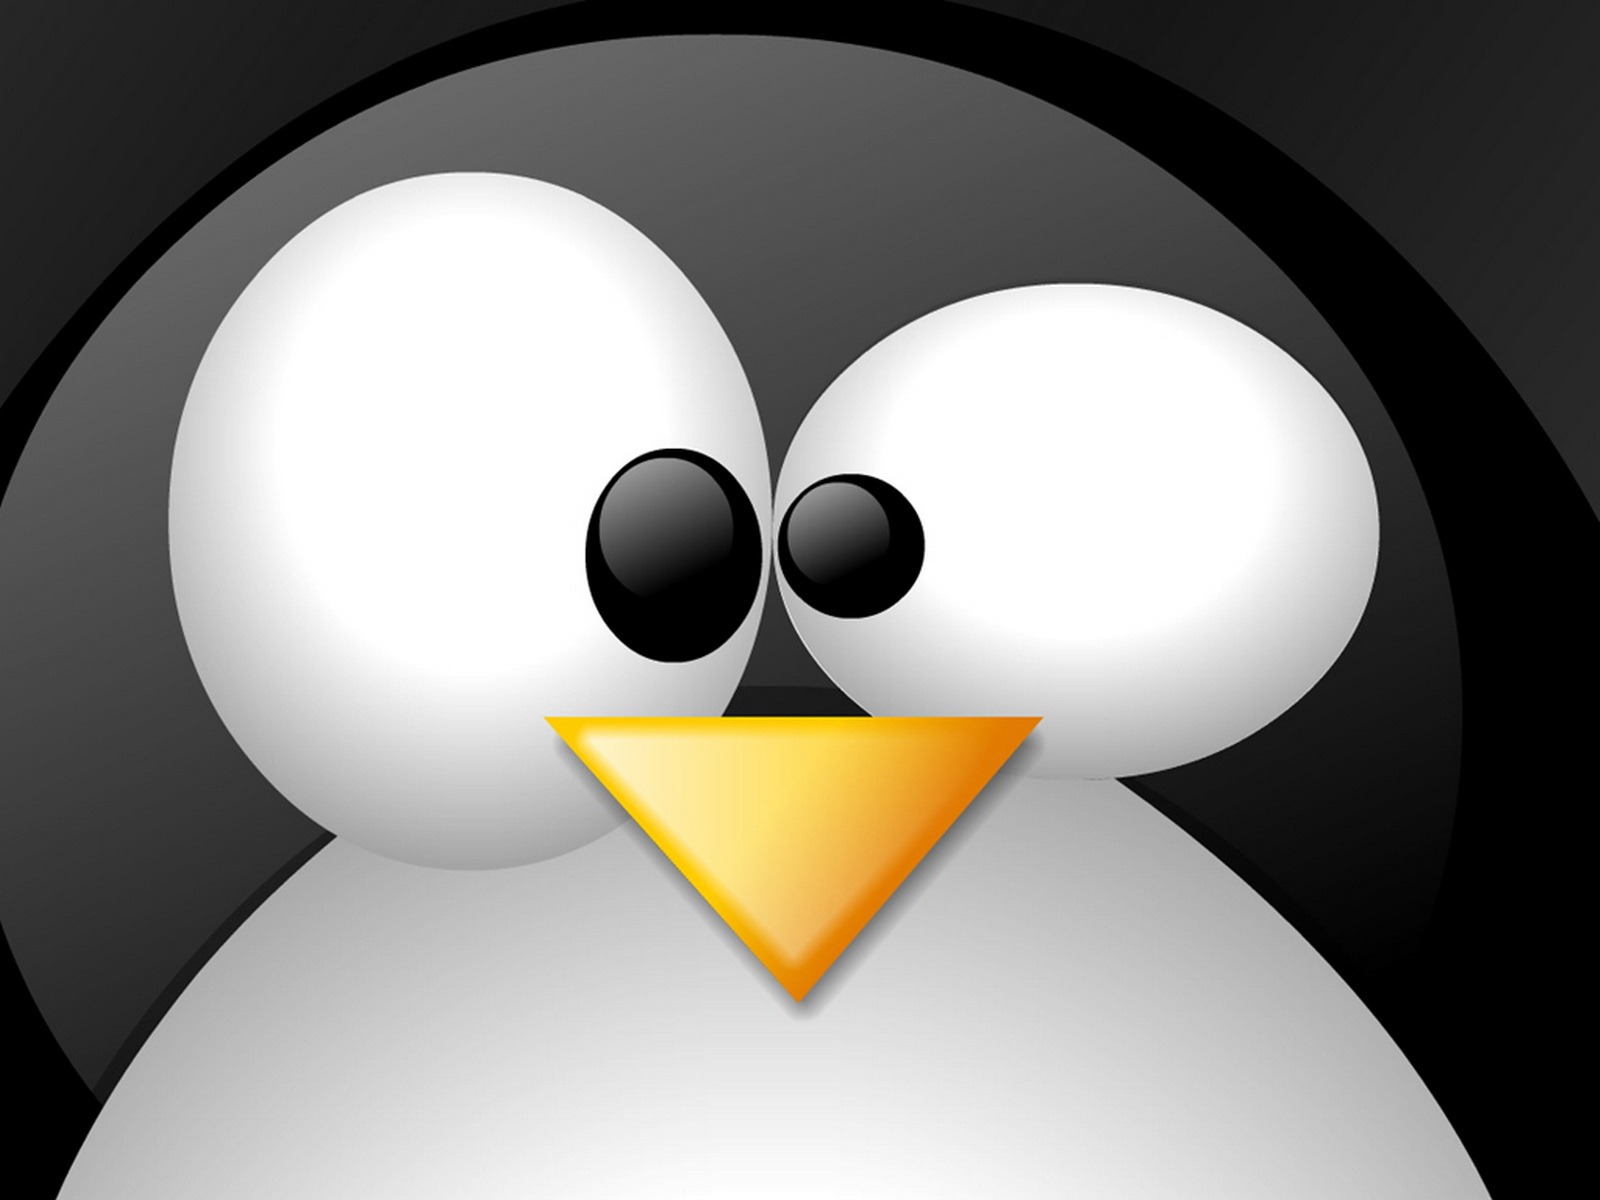 Linux tapety (3) #16 - 1600x1200